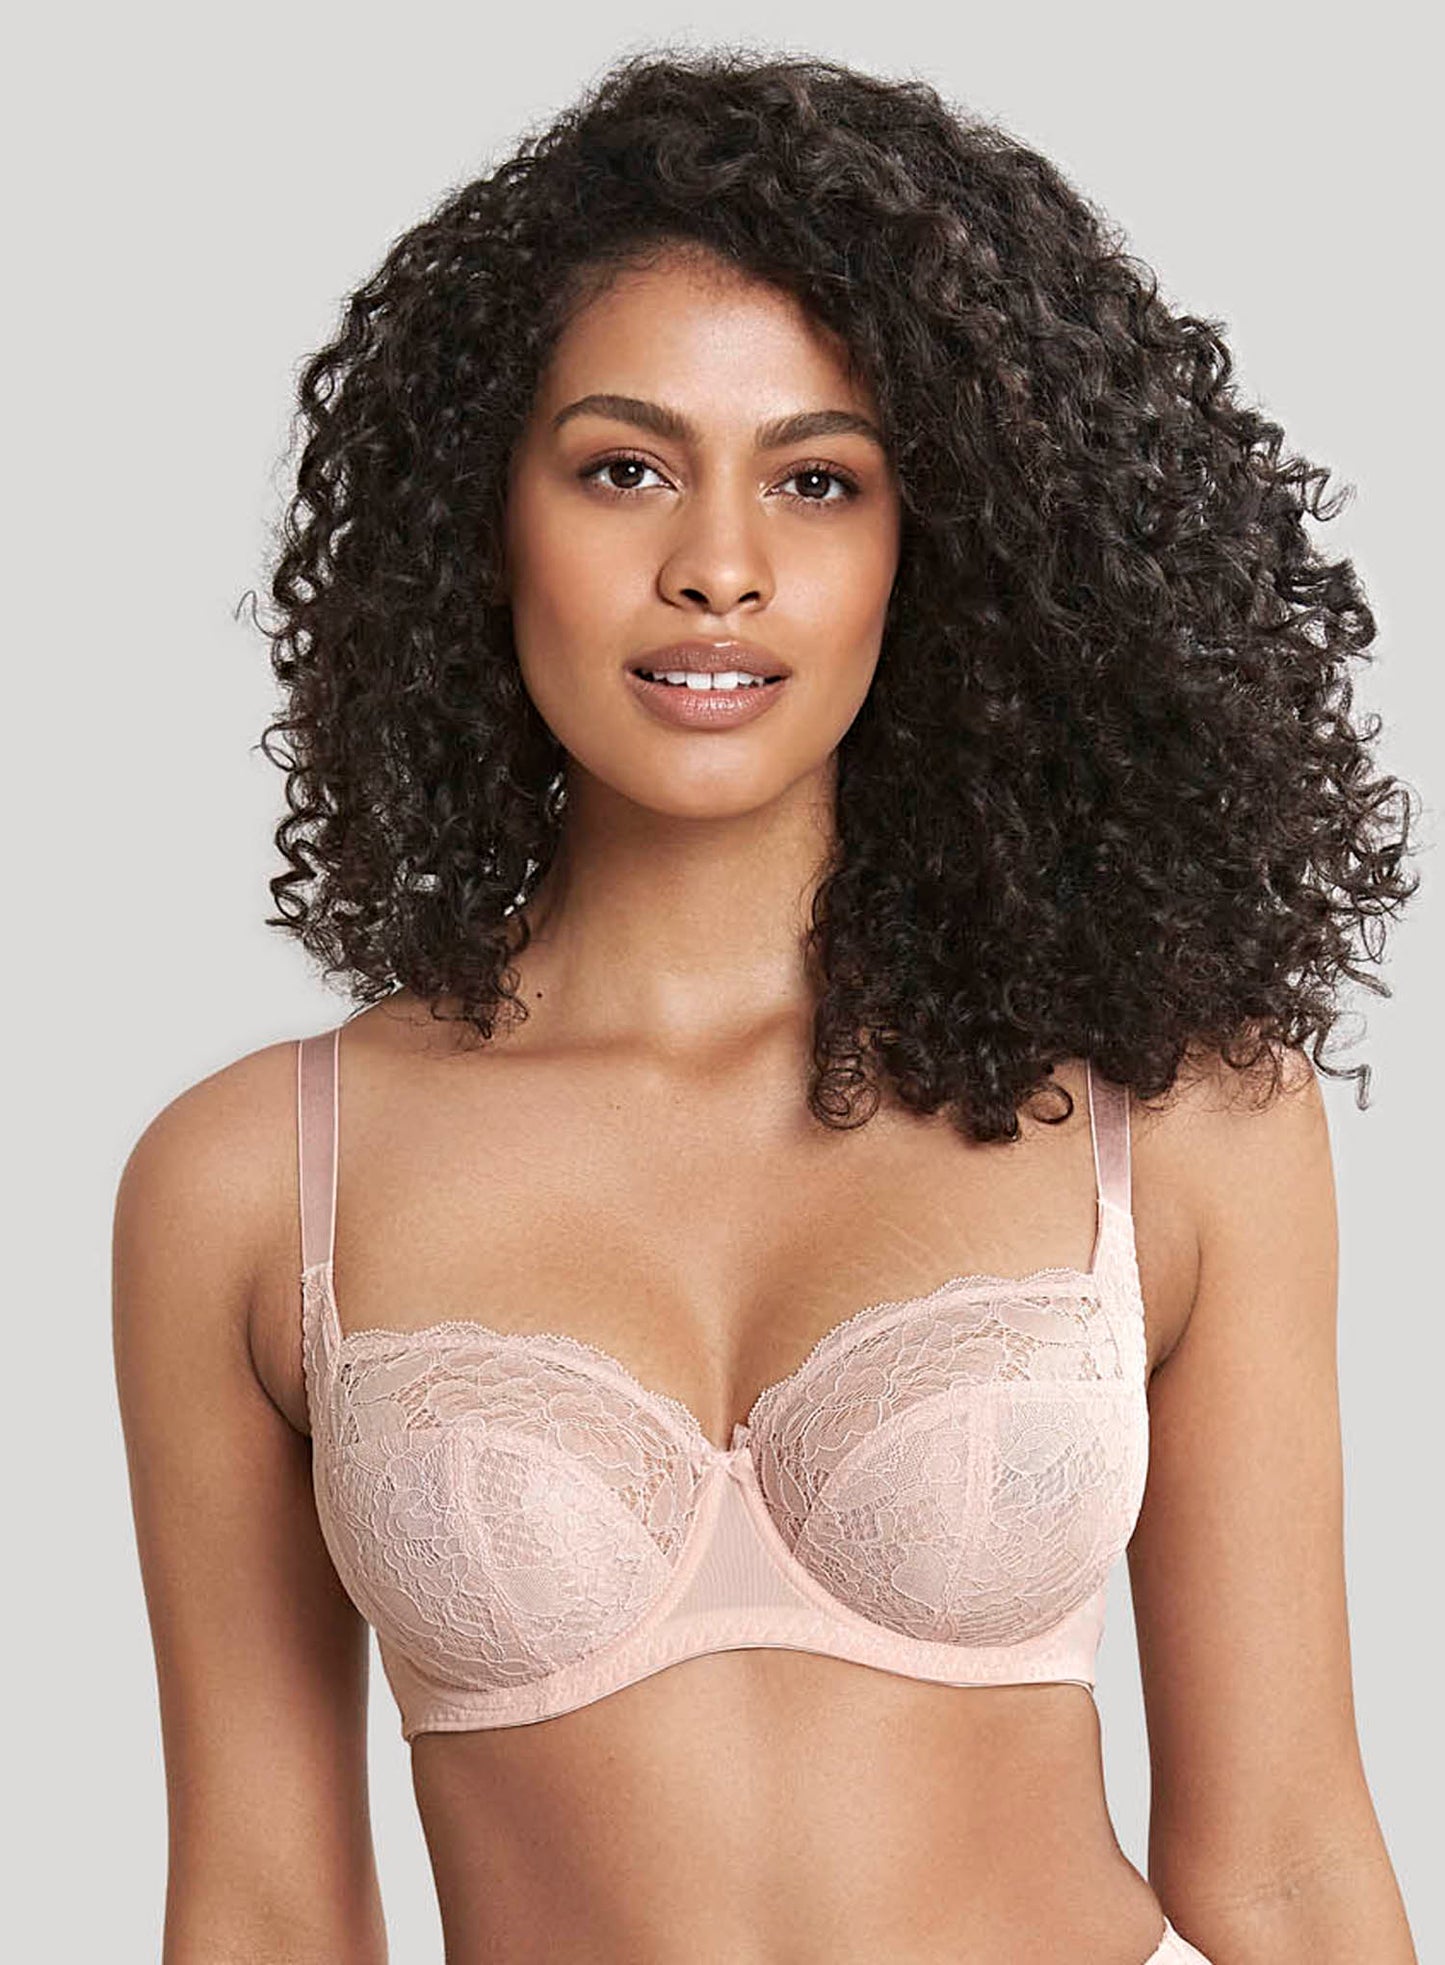 Panache Lingerie - Imogen is back in this beautiful Garnet Rose shade 🌹 A  great addition to any D plus lingerie wardrobe, Imogen is styled with  pretty lace cups for a feminine